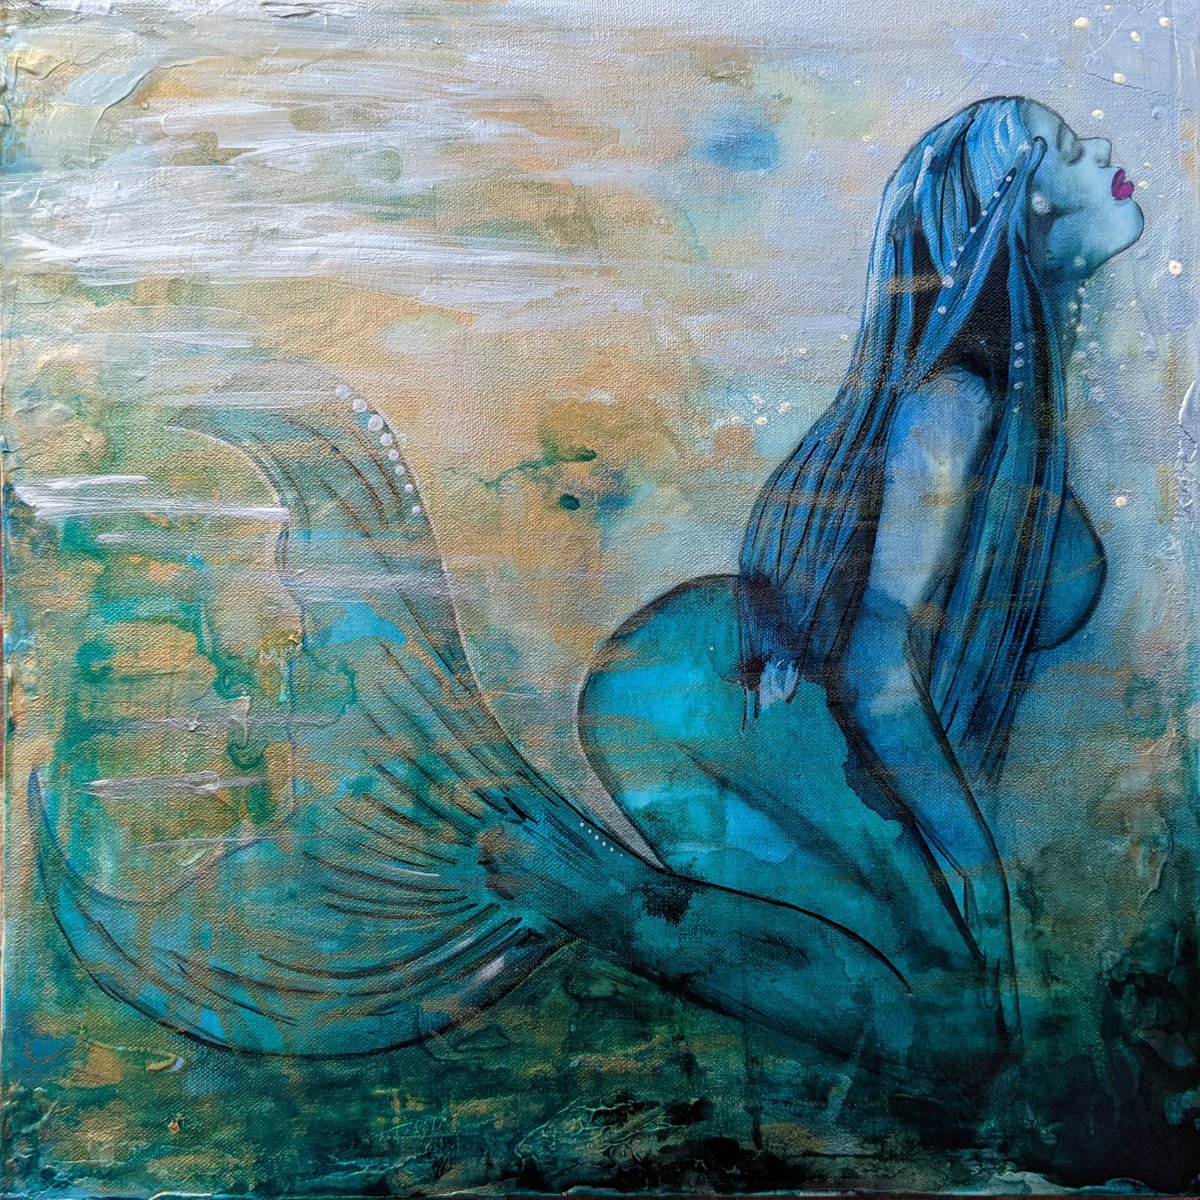 Longing for - Mermaid Painting by Dianne Bowell